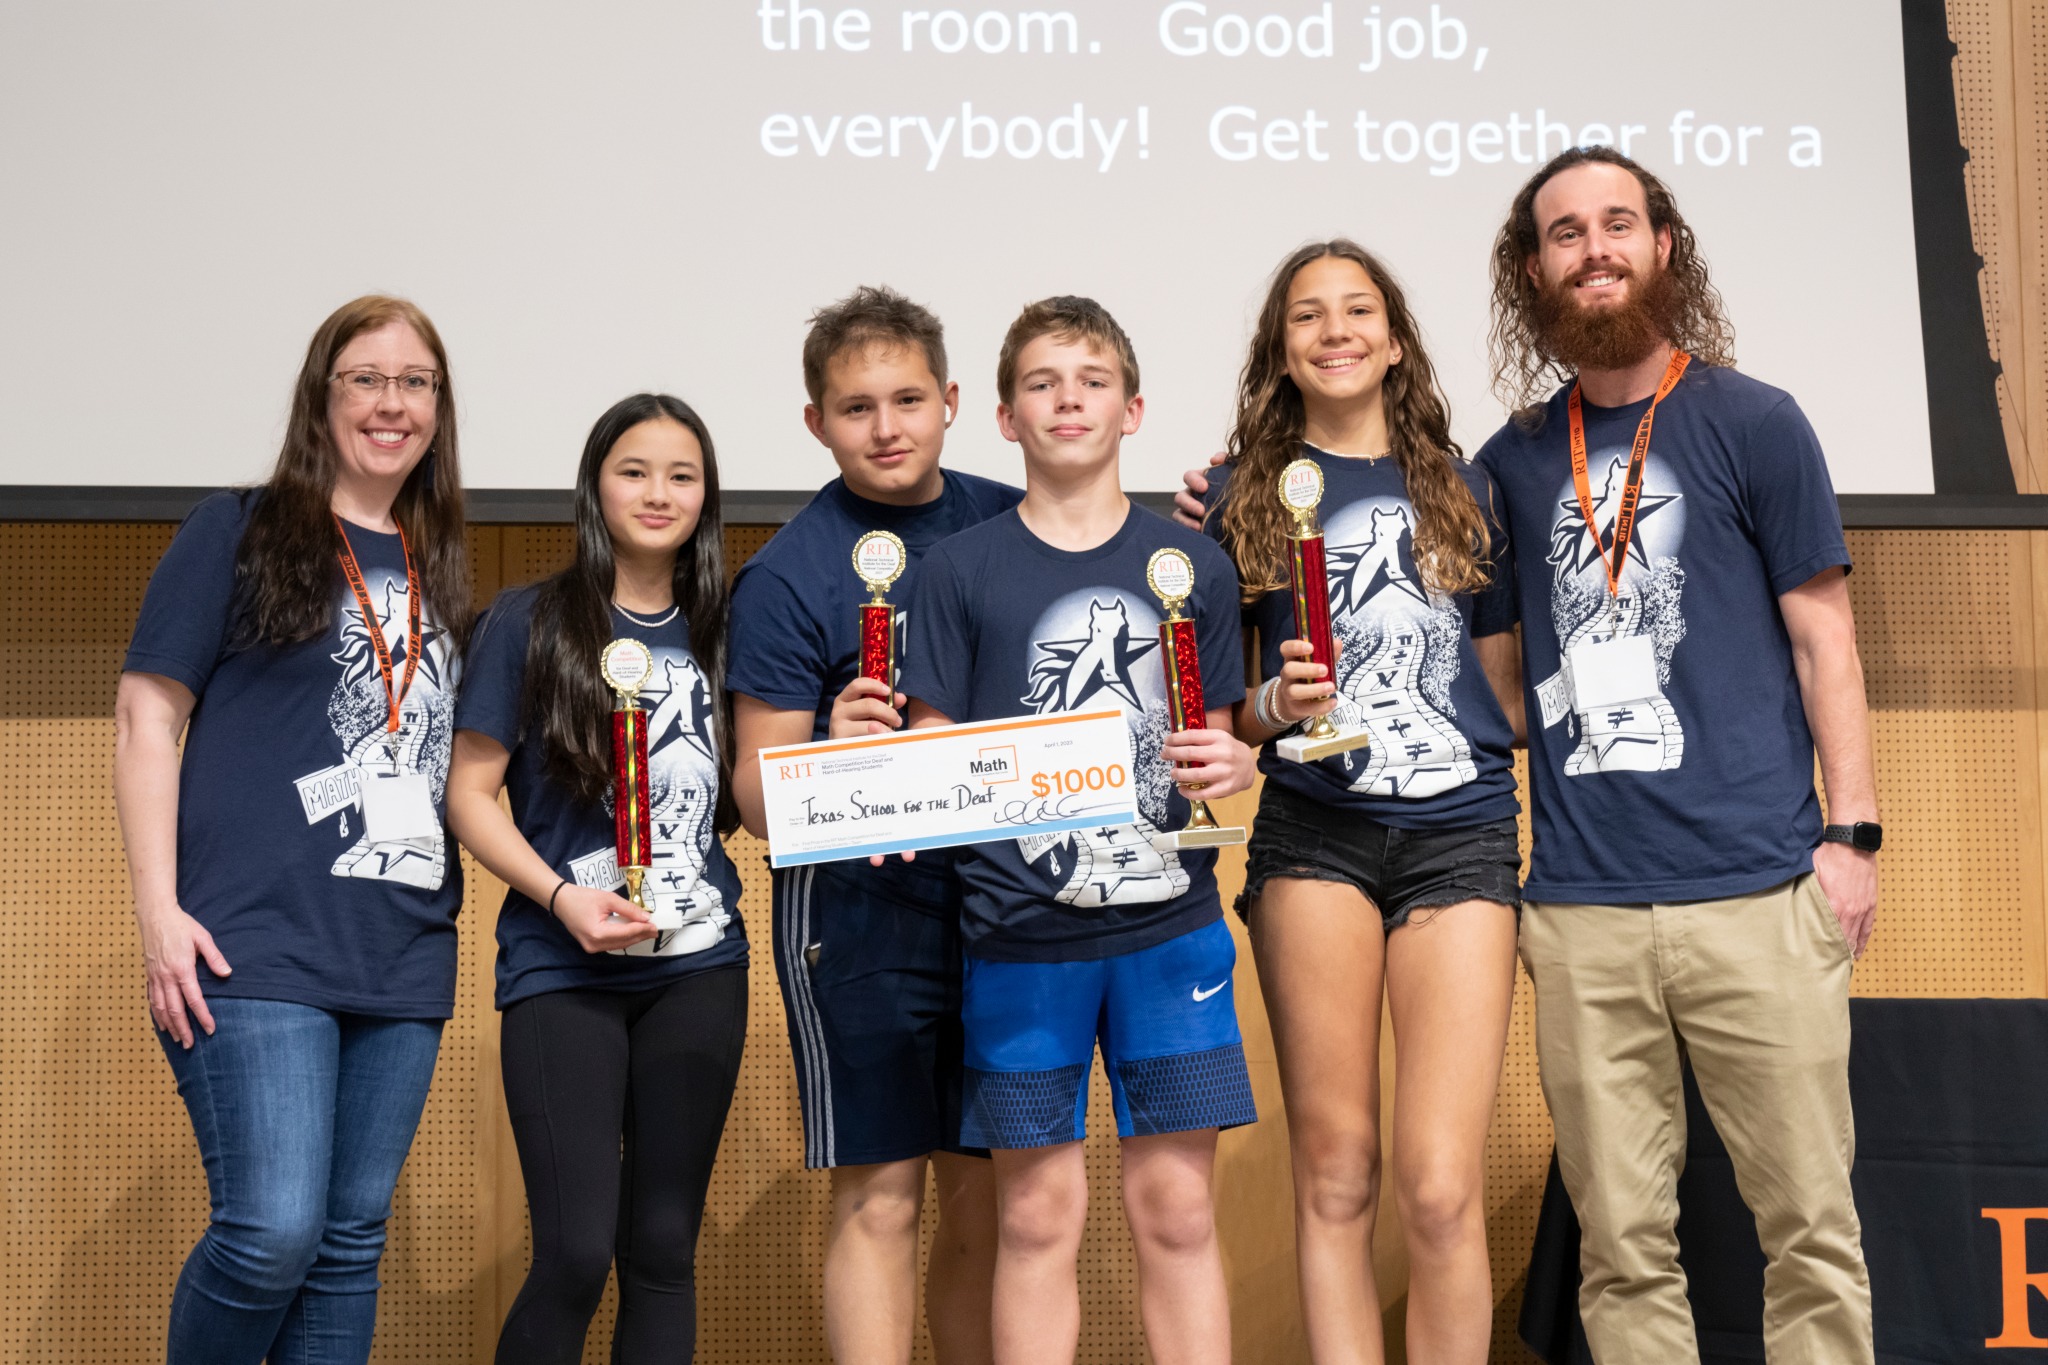 The image shows Texas School for the Deaf contestants and their coaches in blue team shirts, standing in line, facing the camera and holding up trophies and a check for $1,000.